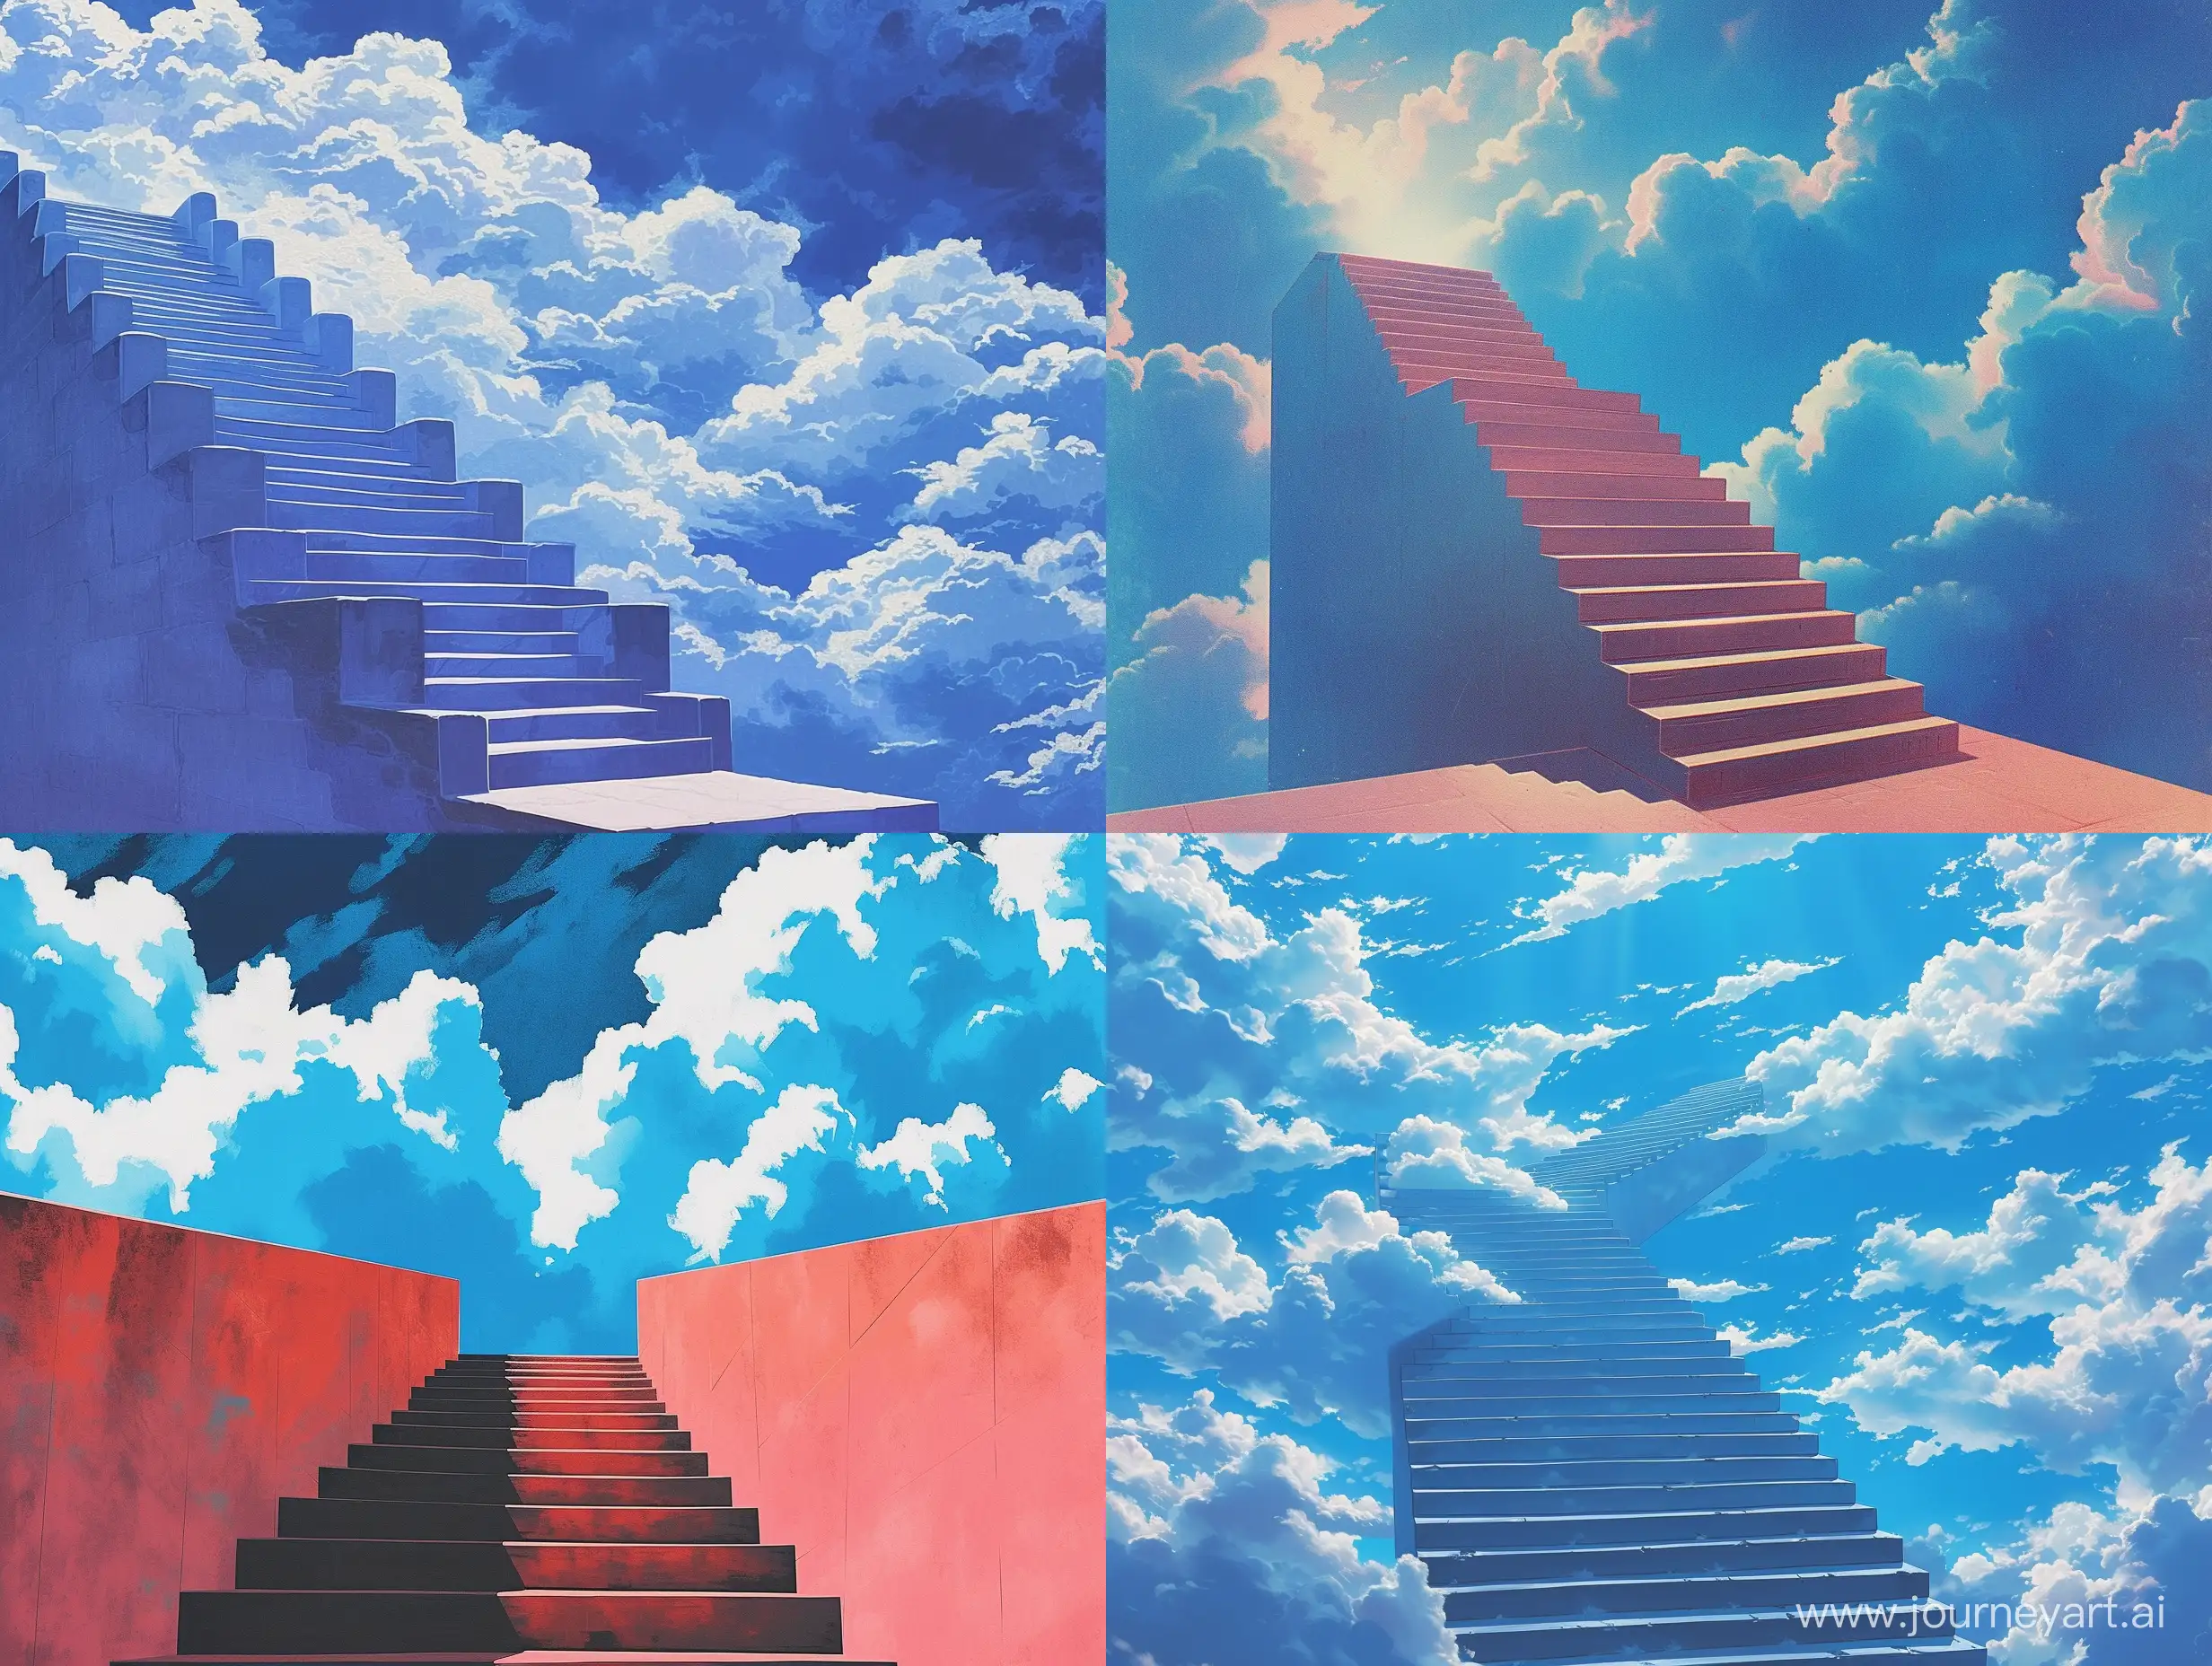 a stairway going up into the blue cloudy skies, artwork drawn by Syd Mead. This chill synthwave artwork poster has a retro 70s and 80s vintage aesthetic with surrealism. It also features artwork by Hiroshi Nagaim and Robert McCall, evoking a nostalgic feeling with its vintage poster and nostalgic colors.